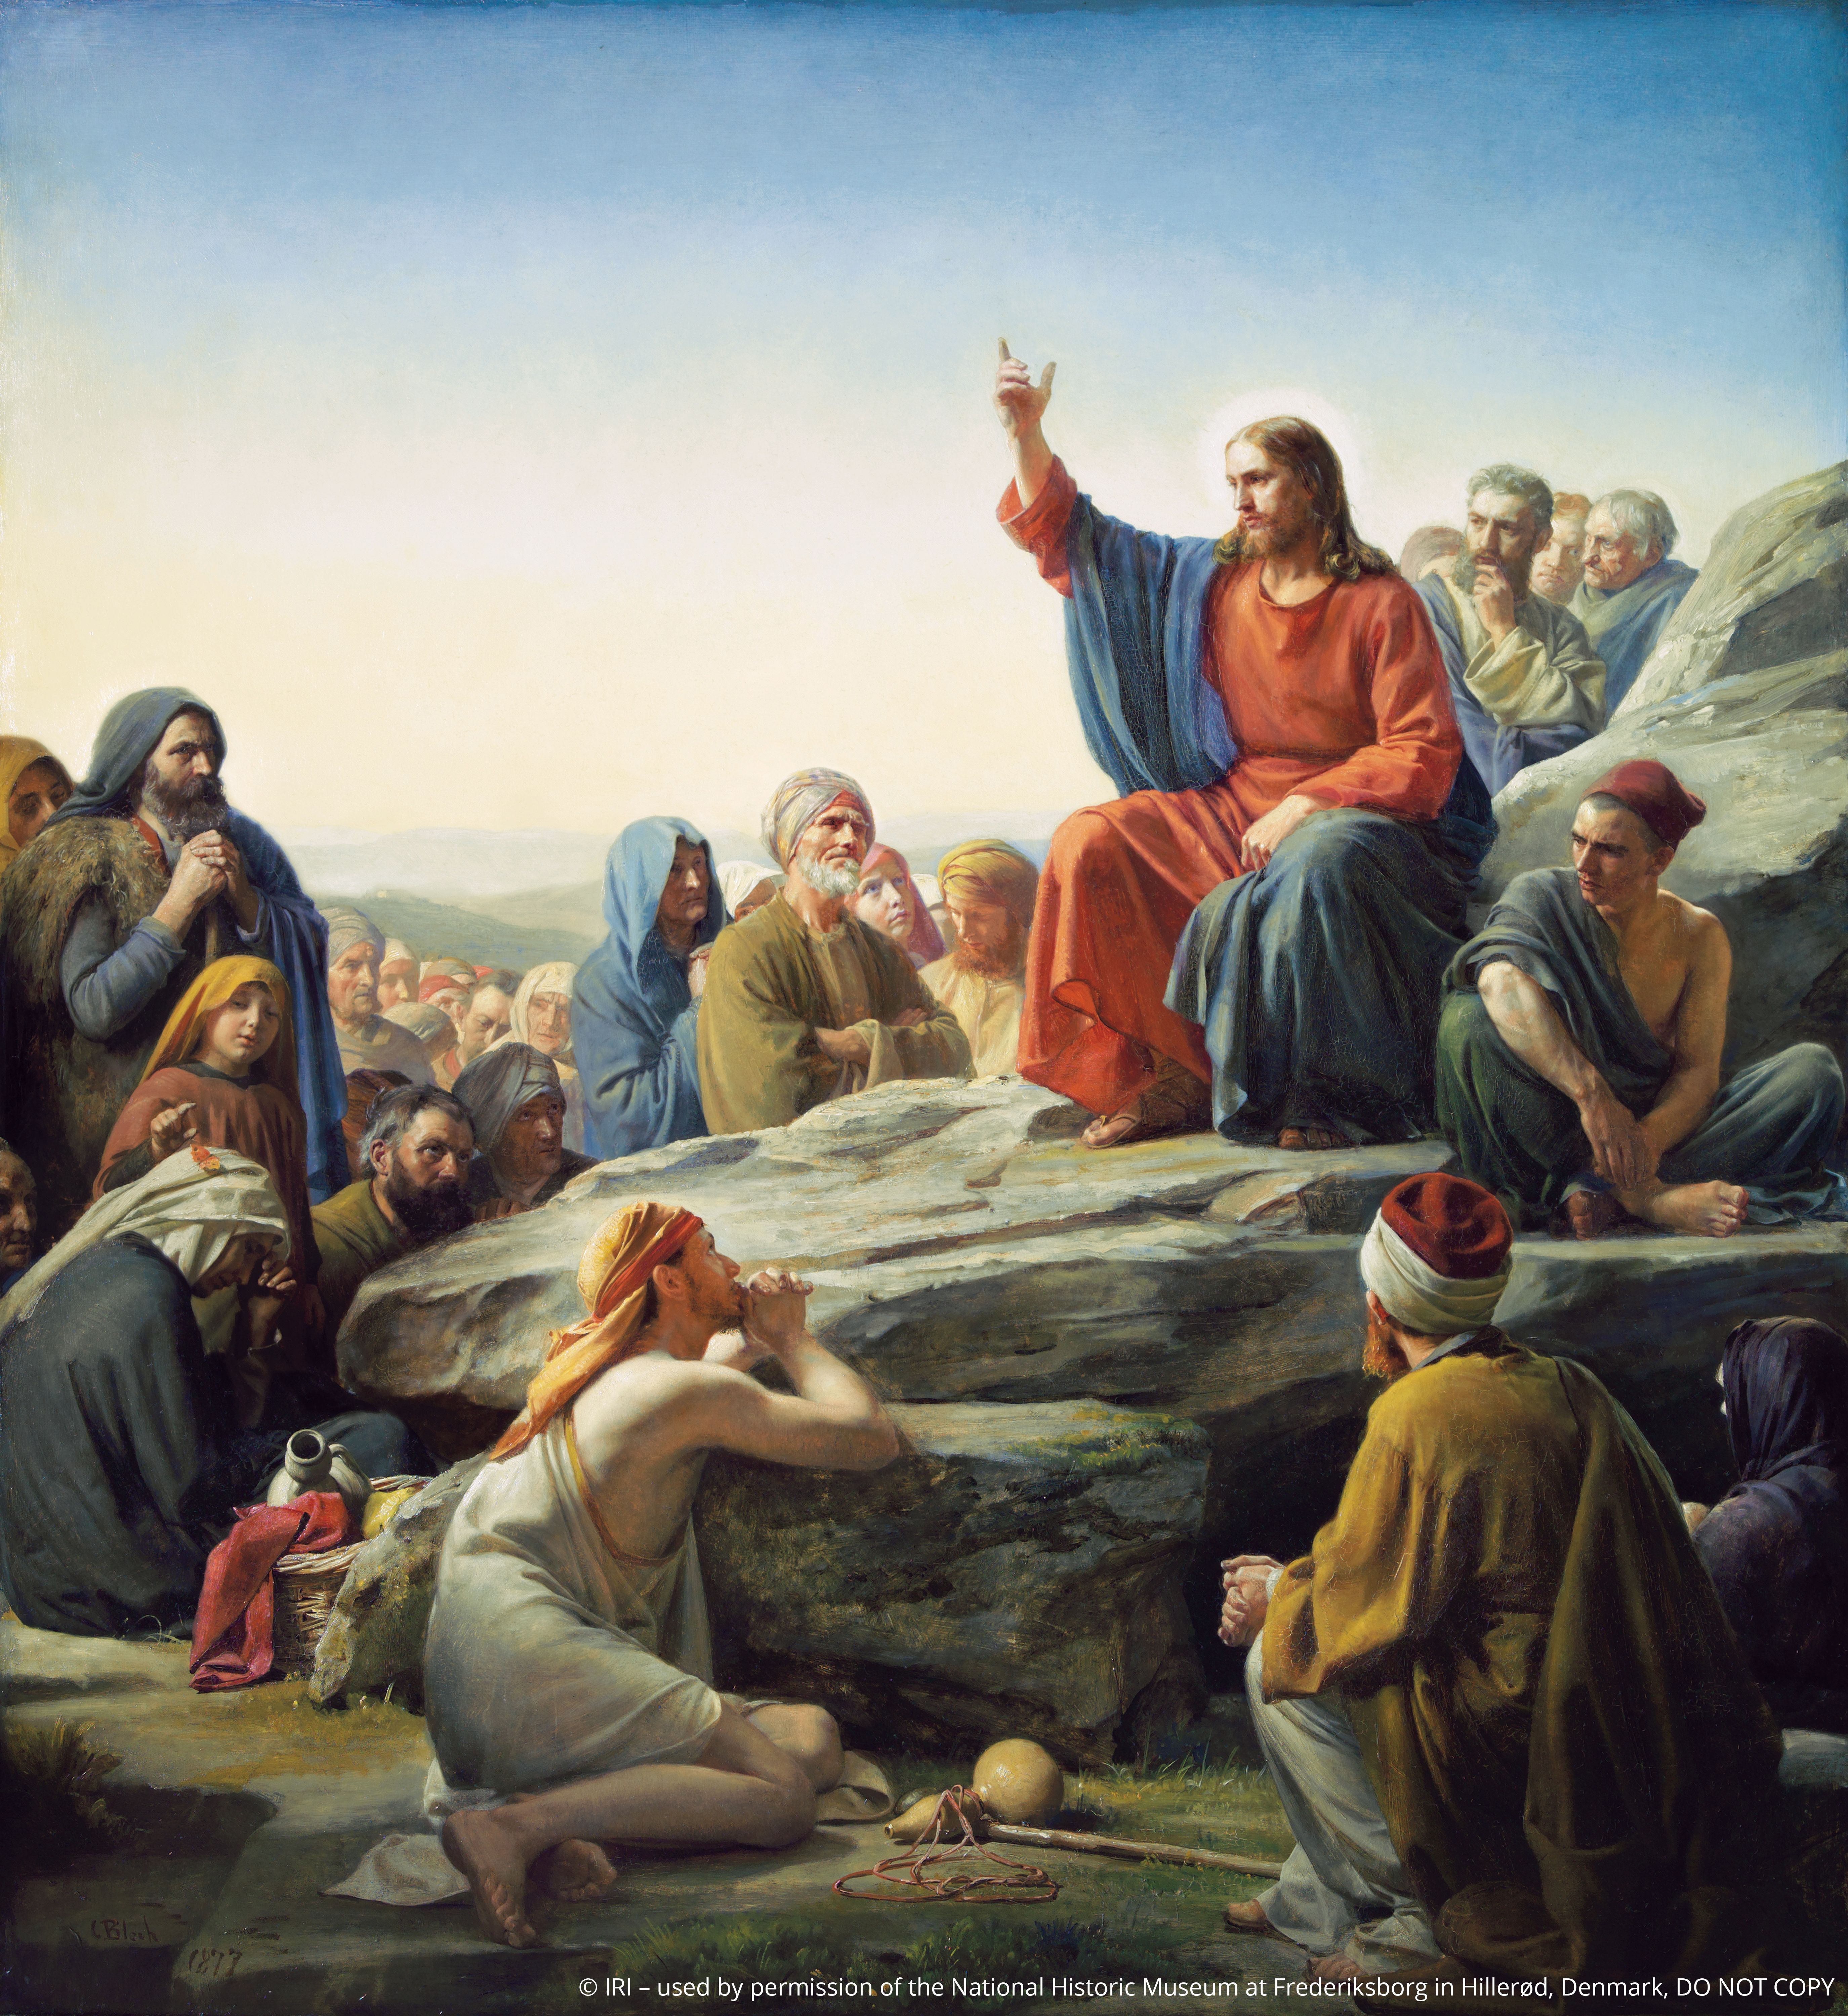 The Sermon on the Mount, by Carl Heinrich Bloch; GAB 39; Matthew 5–7; © IRI, used by permission of the National Historic Museum at Frederiksborg in Hillerød, Denmark. DO NOT COPY. This asset is for Church use and online viewing only.